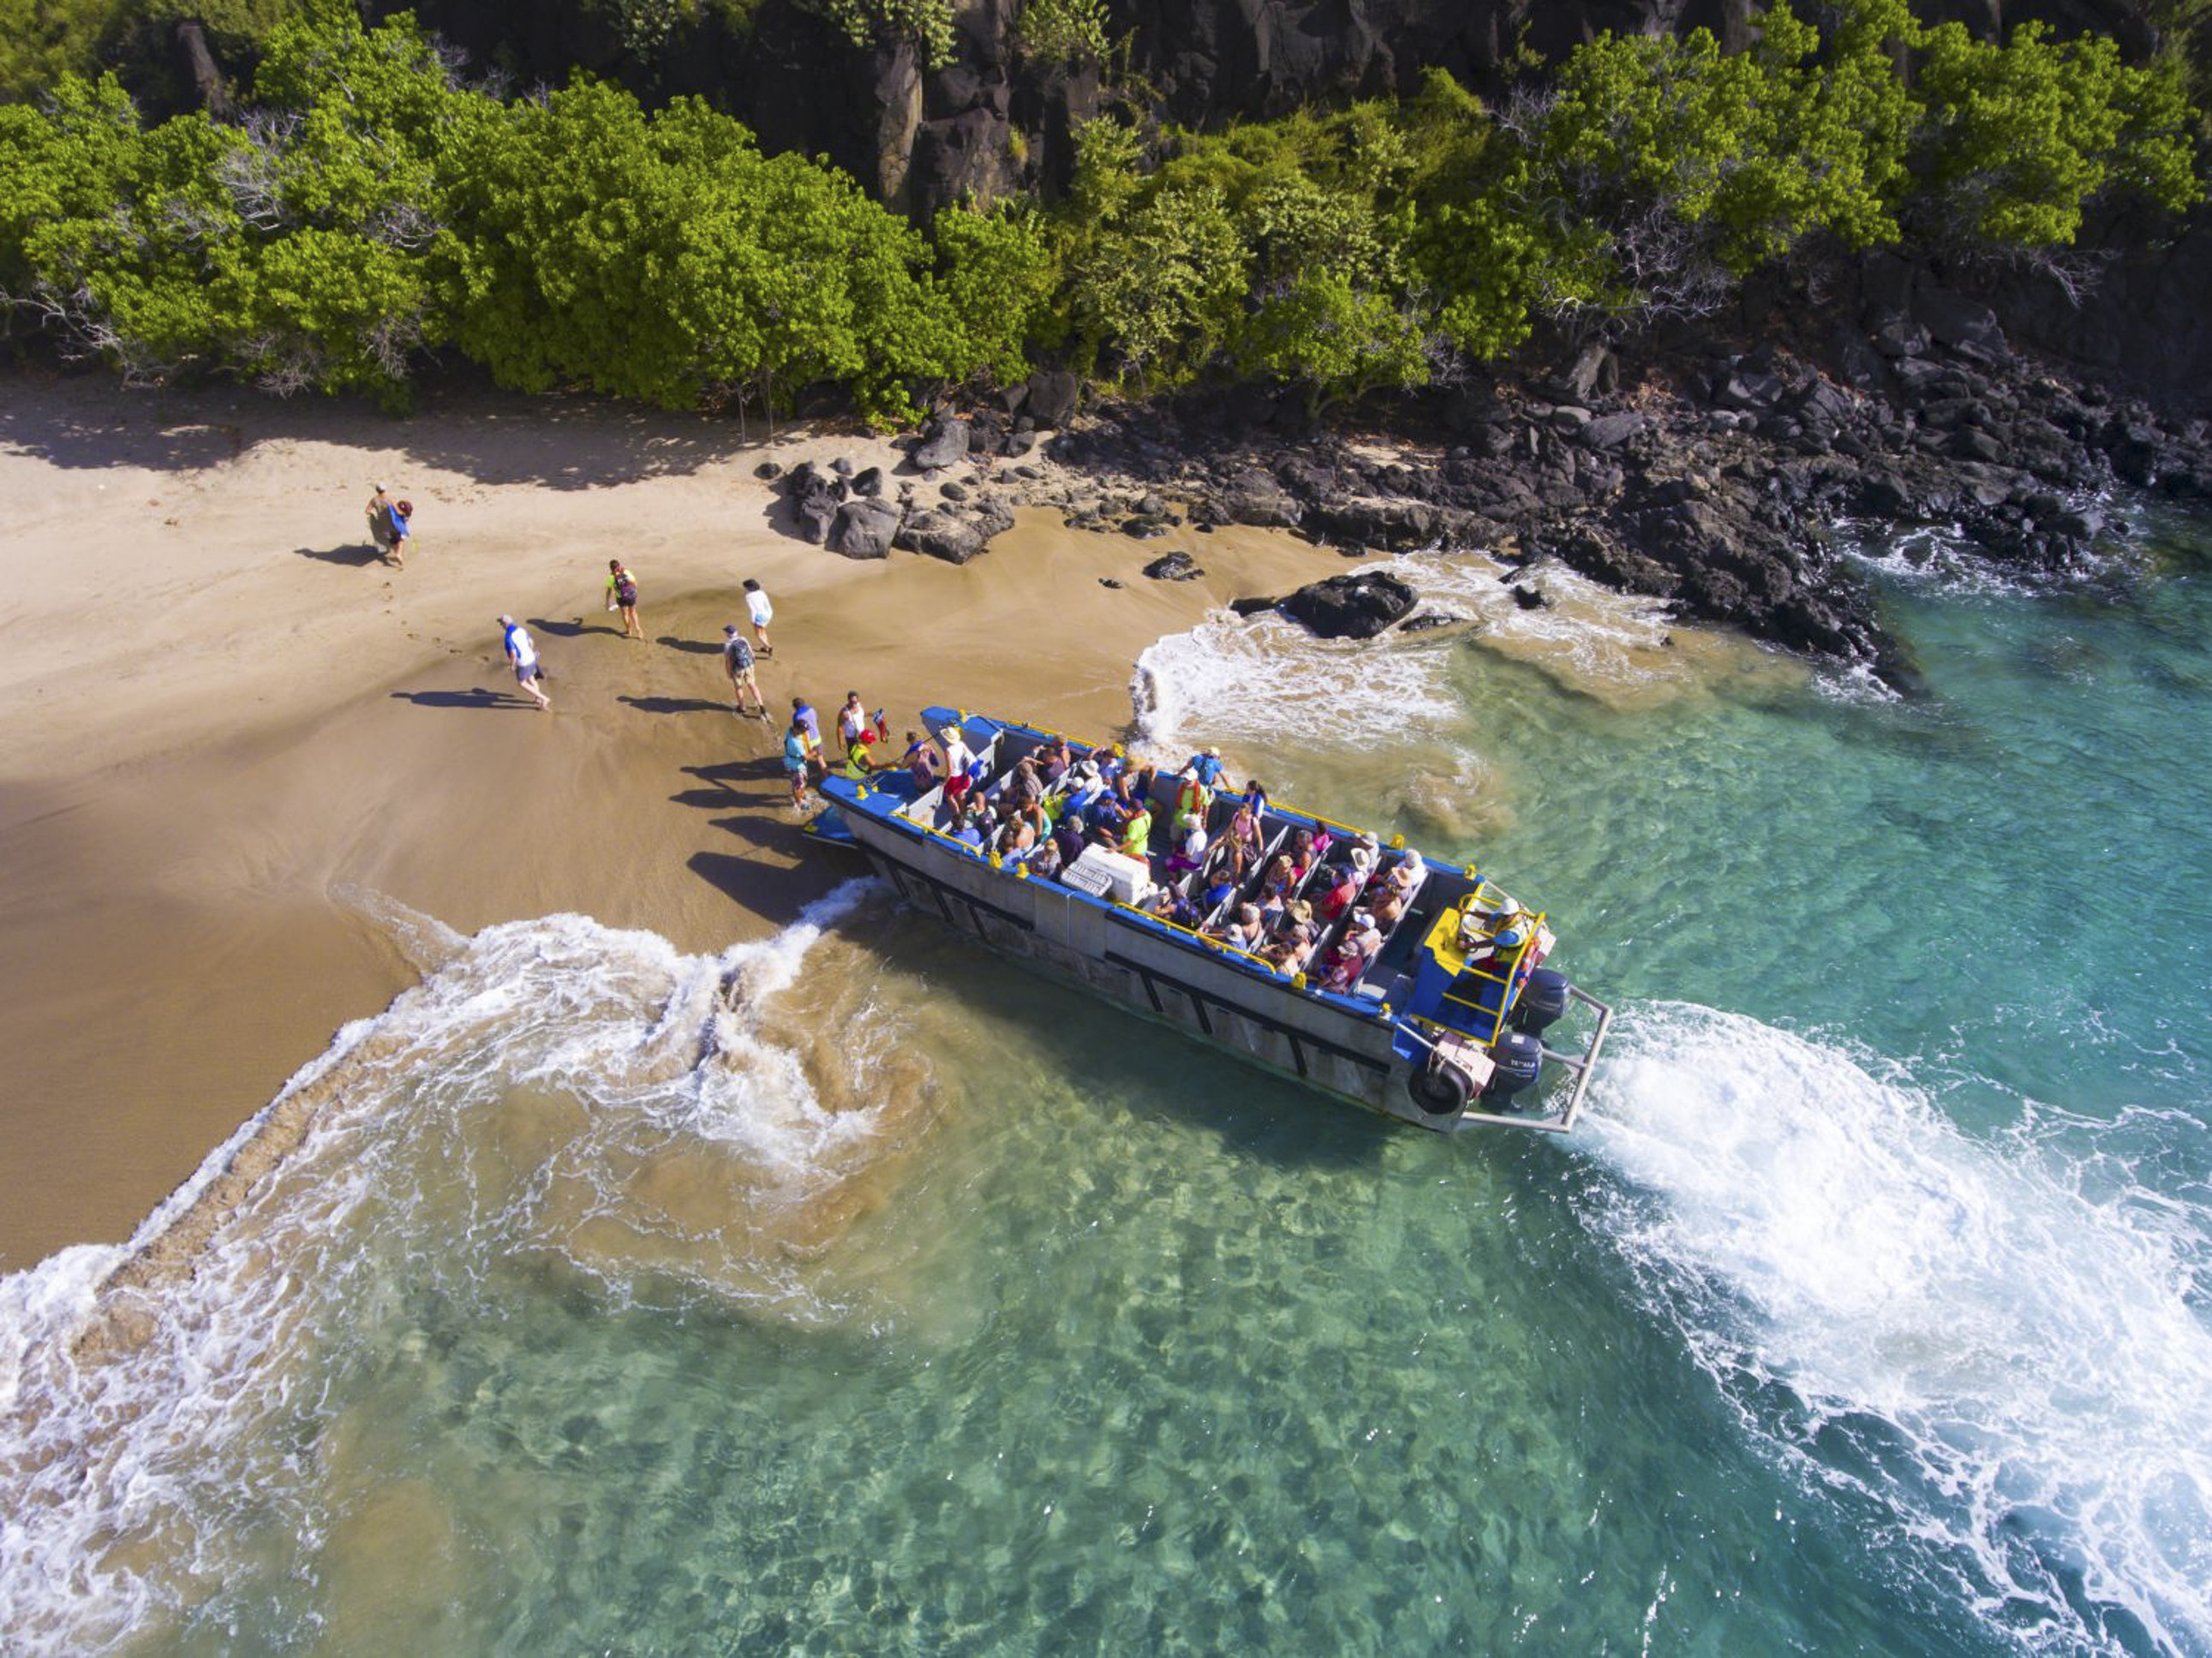 A vintage landing craft deposits passengers onto a sugar-sanded beach in French Polynesia’s Austral Islands. Small-ship cruises to far-flung destinations are a growing trend. Photo: Aranui Cruises